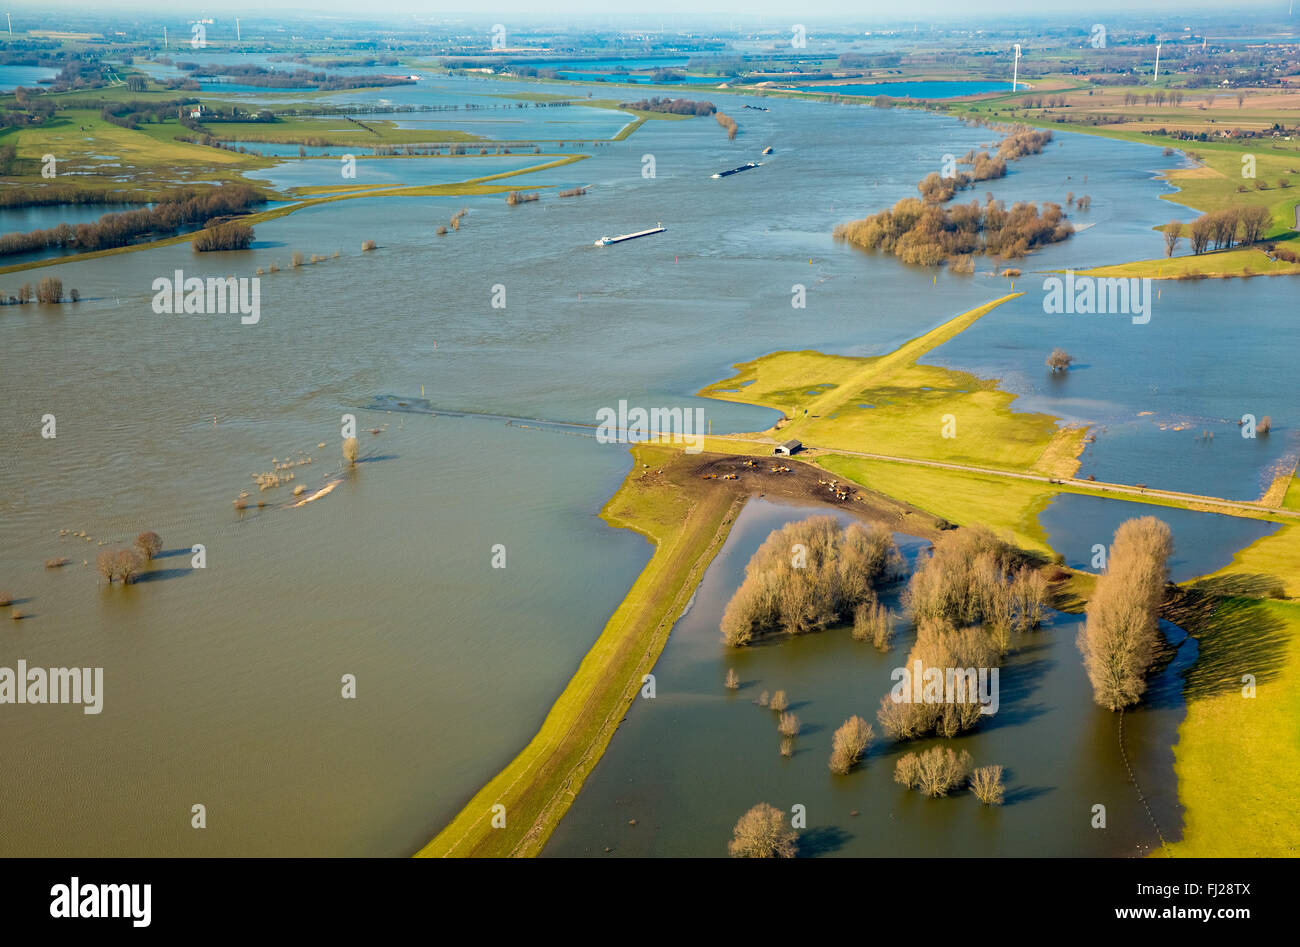 Aerial view, flood floodplains in Wesel and Xanten, Rhine, inland waterways, blue sky, high level state, barn with cows Stock Photo